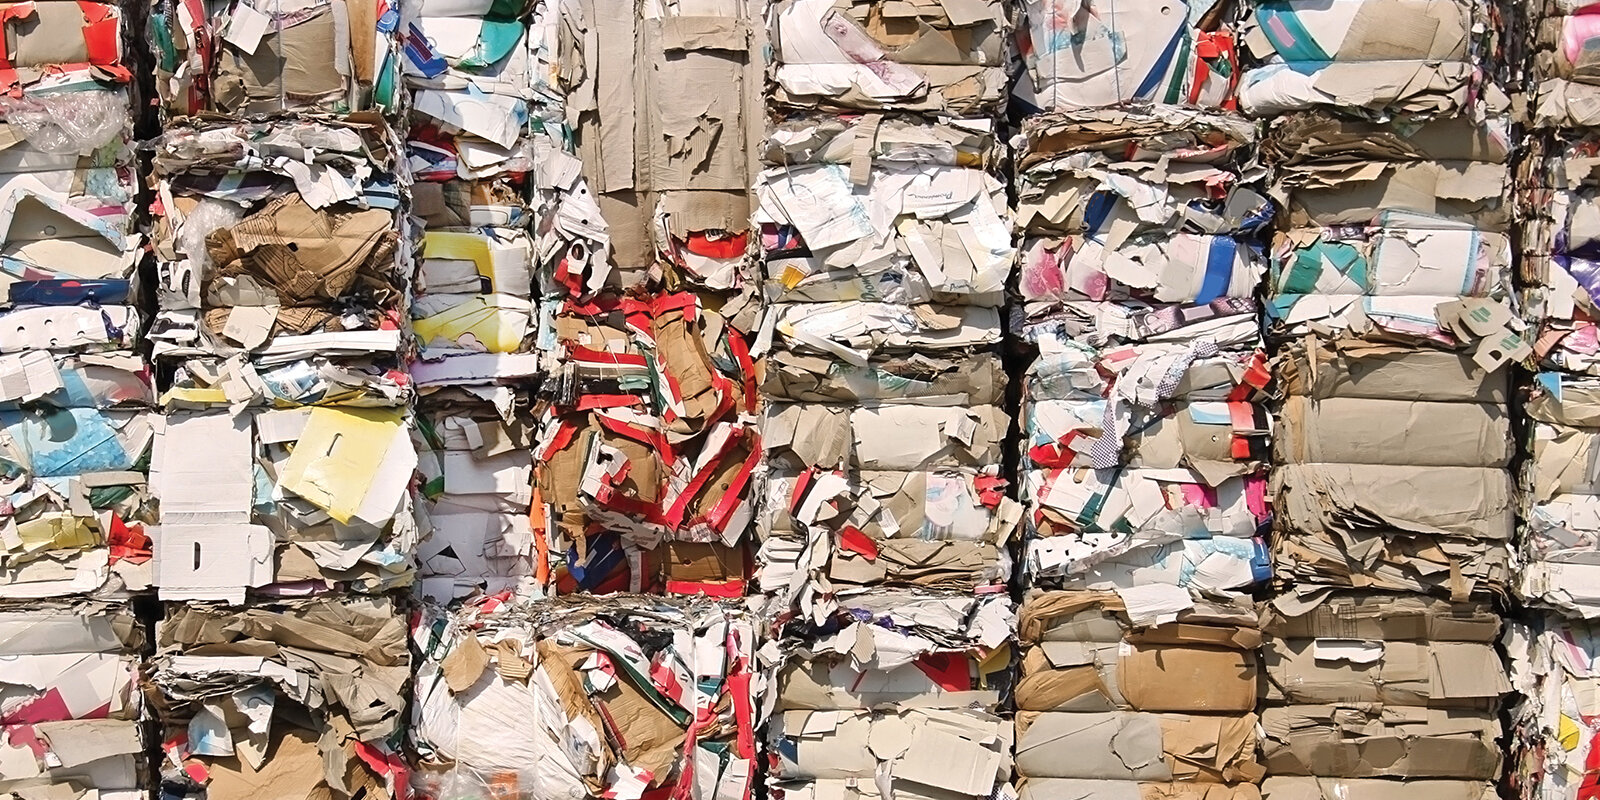 Victoria produces more than 14 million tonnes of waste each year. We could meet state targets to recycle up to 90% of our waste by focusing on six priority materials – plastics, paper and cardboard, glass, organics, tyres, and e-waste.